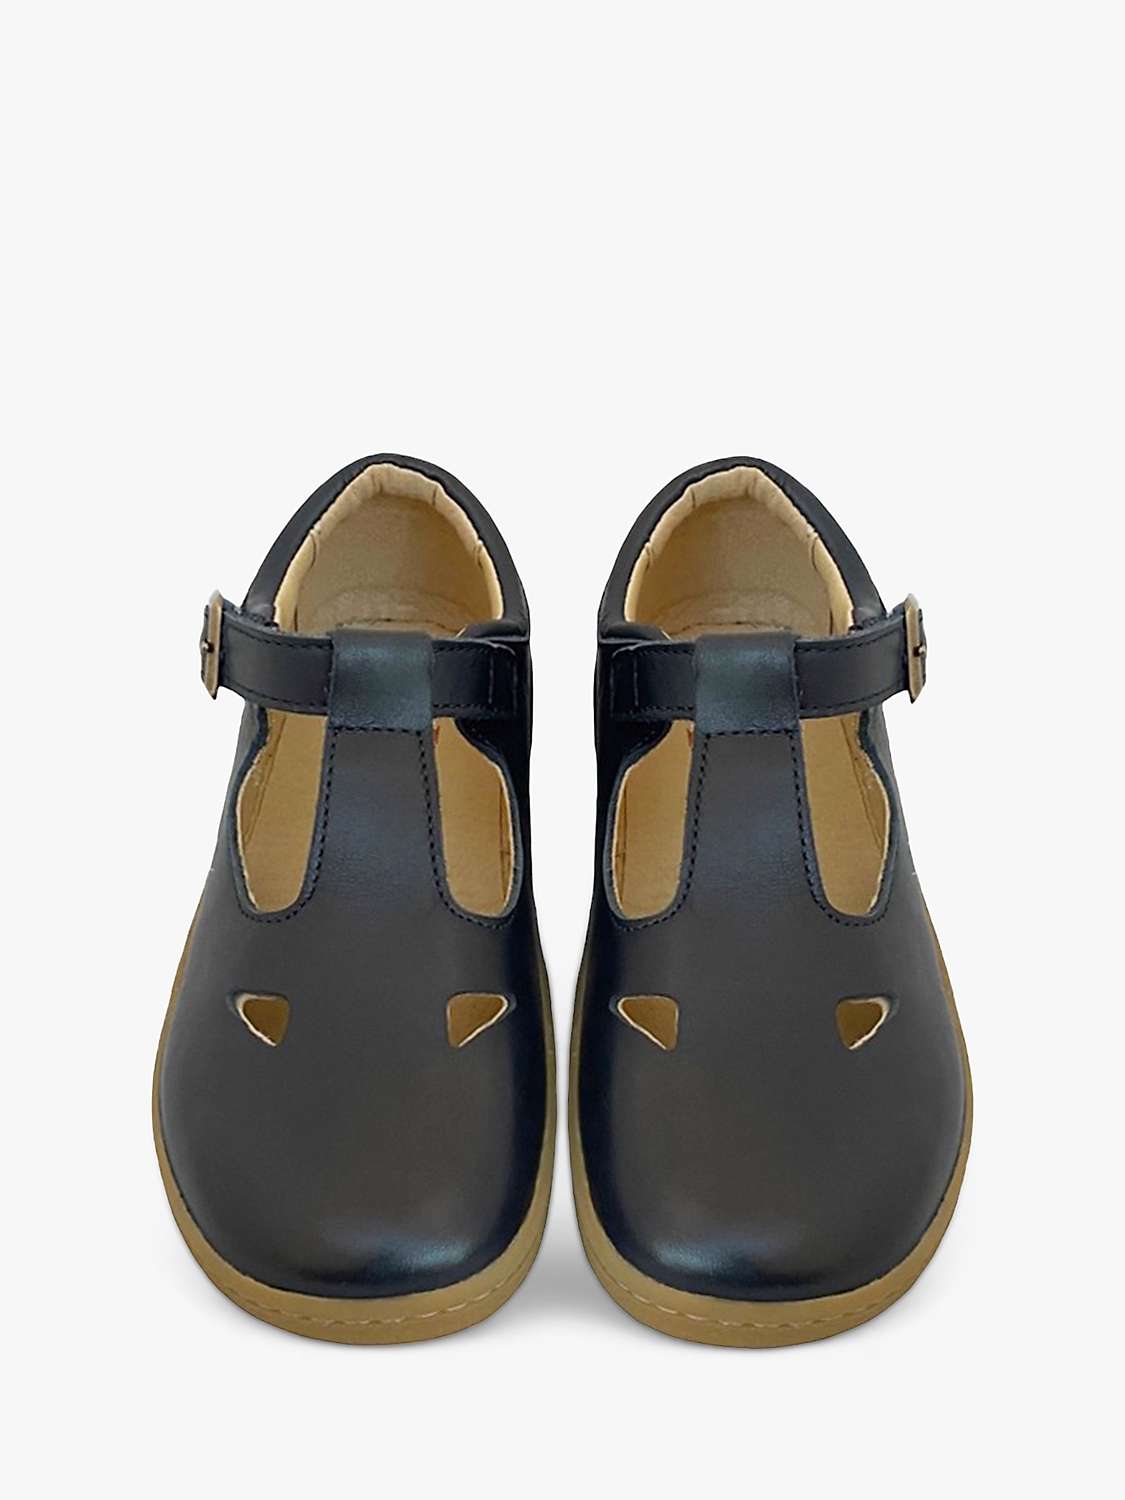 Buy Young Soles Kids' Leather Darcey T-Bar Shoes, Navy Online at johnlewis.com